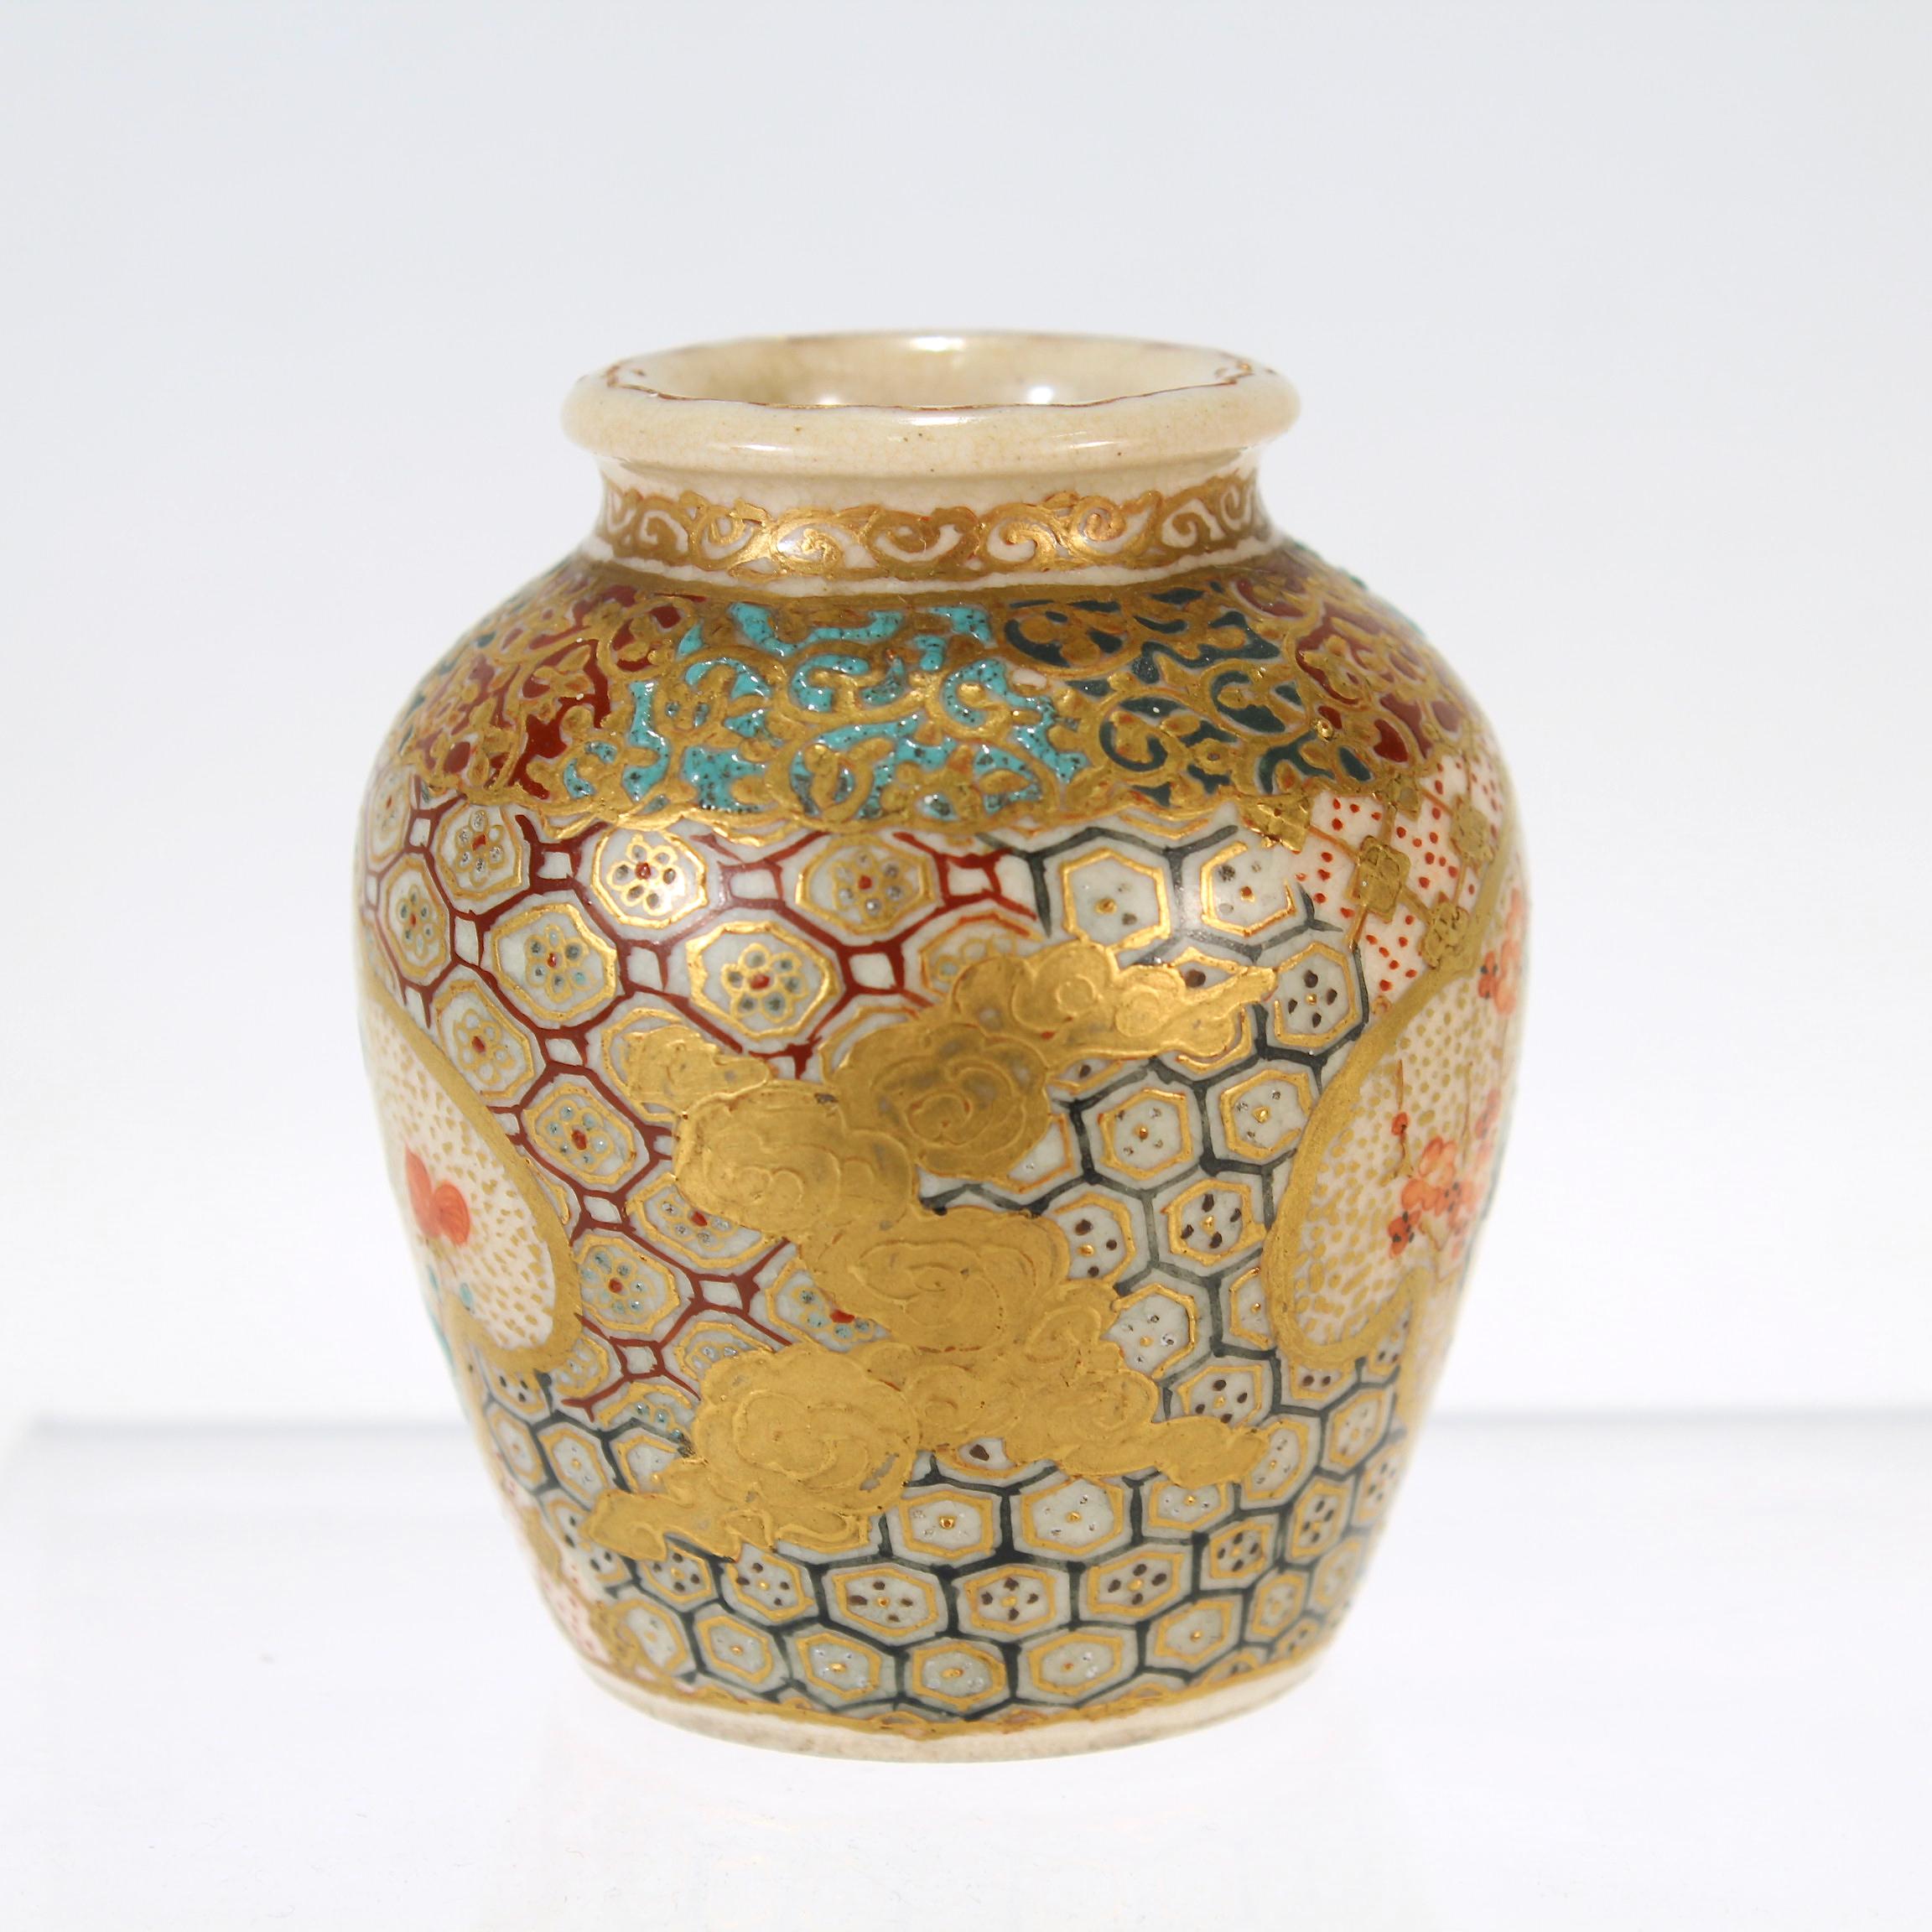 A fine diminutive, antique Japanese Satsuma pottery cabinet vase.

Decorated throughout with gilding and raised enamel.

There are two cartouches on the vase decorated with red flowers (possibly peonies) and birds.

The mouth of the vase has a